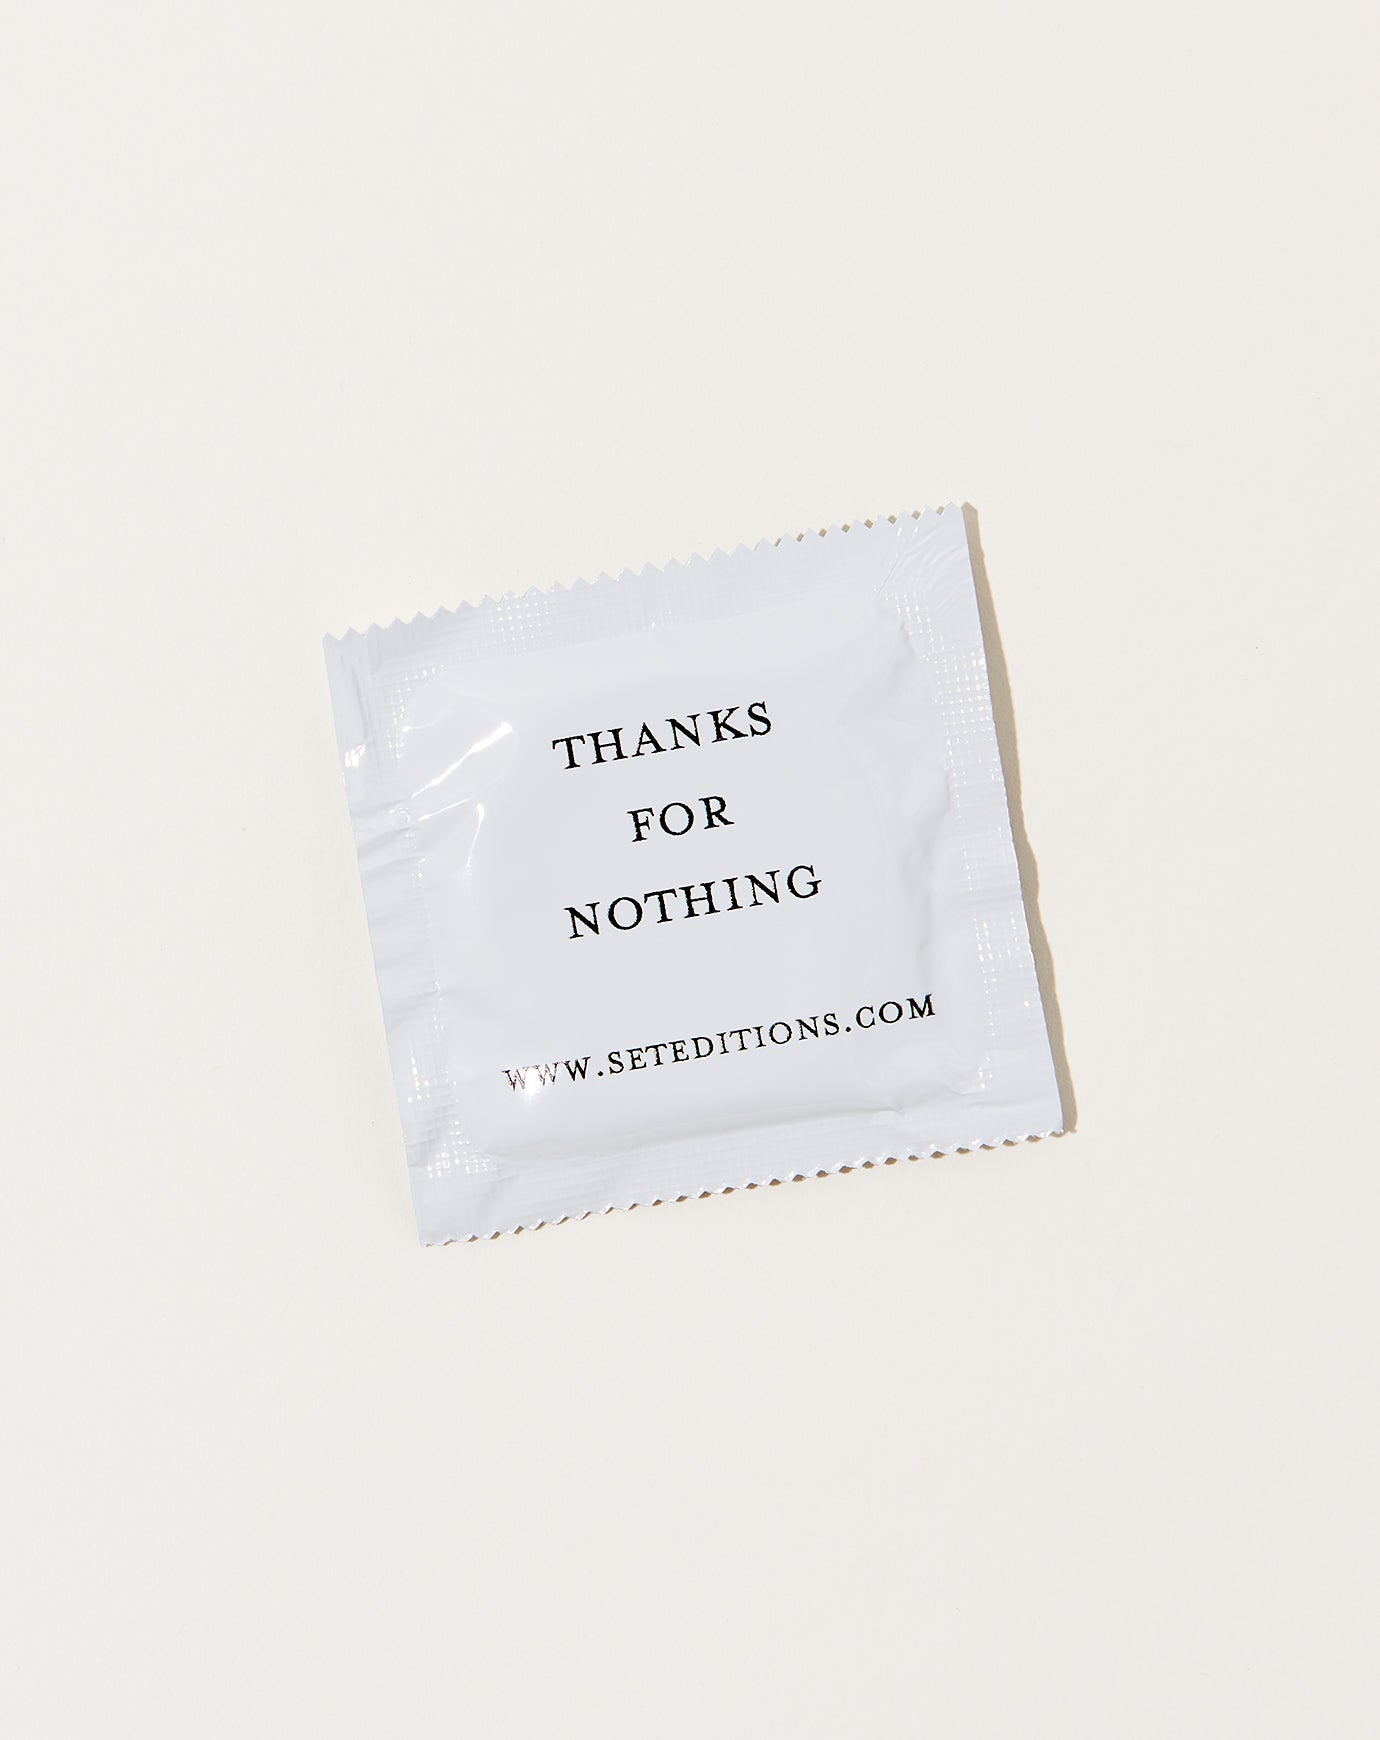 Set Editions "Thanks for Nothing" Condoms